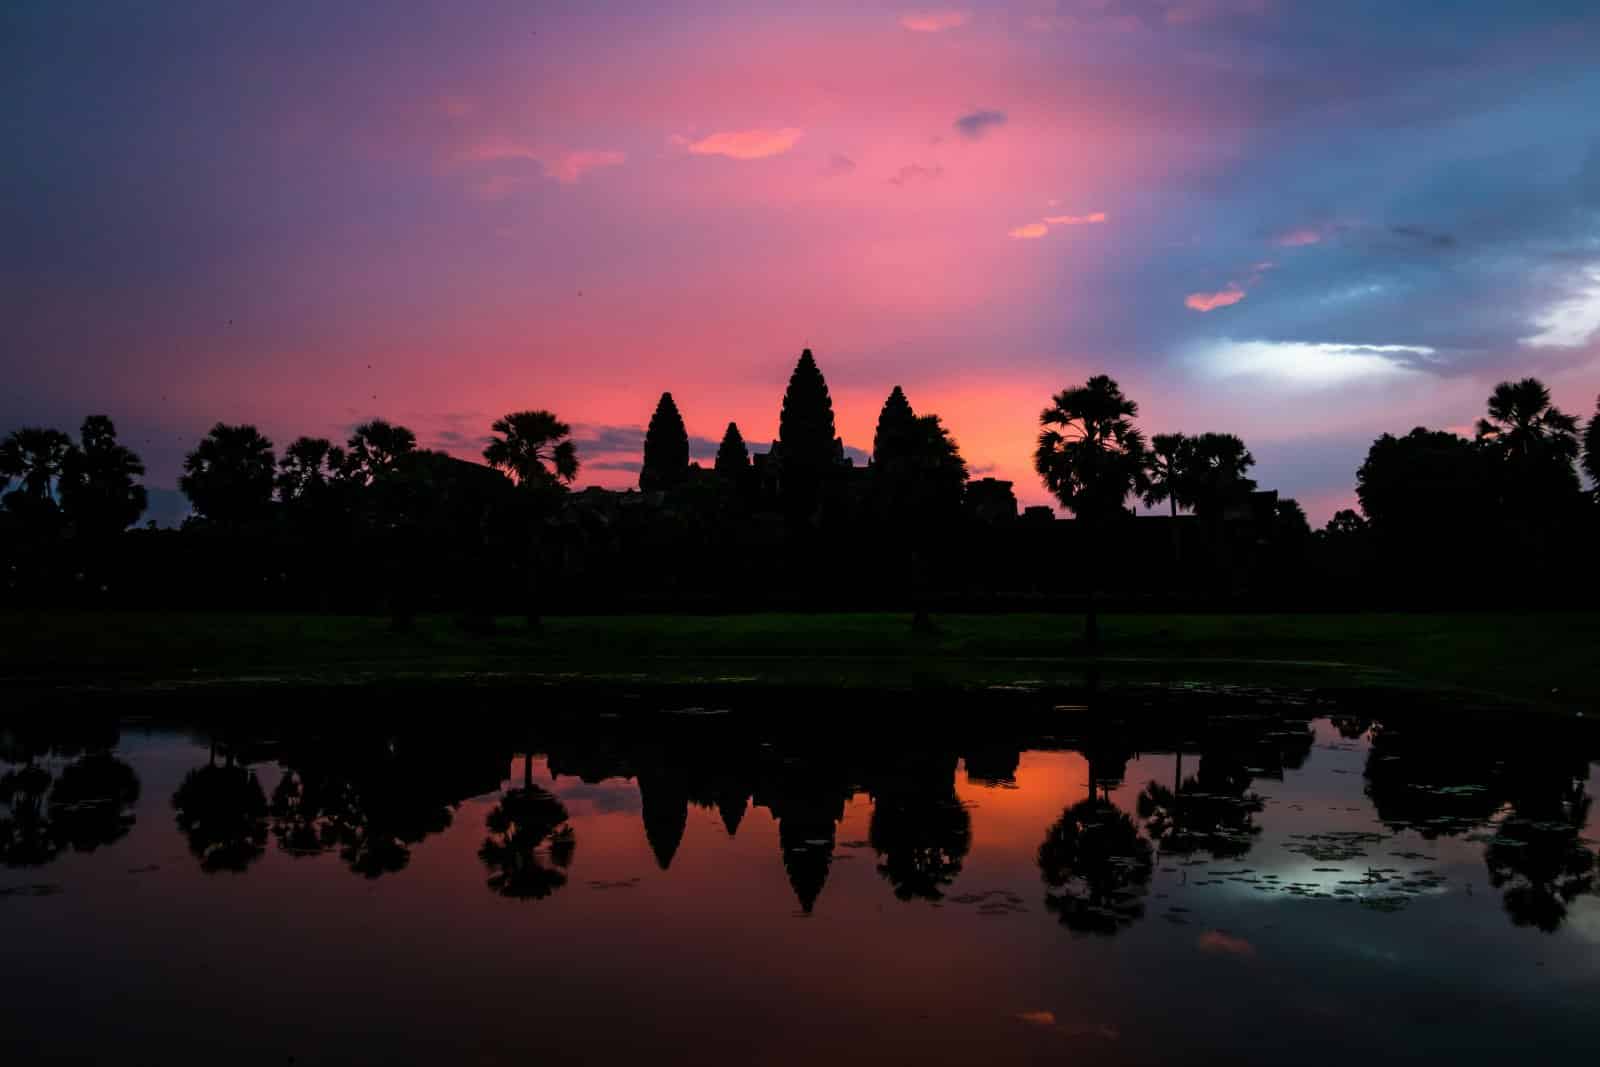 <p><span>In Siem Reap, every moment is an opportunity to explore historical wonders. As you journey through the city, from the ancient ruins of Angkor to the vibrant streets of downtown, you’ll witness the Khmer Empire’s enduring legacy and modern Cambodia’s resilience.</span></p> <p><span>More Articles Like This…</span></p> <p><a href="https://thegreenvoyage.com/barcelona-discover-the-top-10-beach-clubs/"><span>Barcelona: Discover the Top 10 Beach Clubs</span></a></p> <p><a href="https://thegreenvoyage.com/top-destination-cities-to-visit/"><span>2024 Global City Travel Guide – Your Passport to the World’s Top Destination Cities</span></a></p> <p><a href="https://thegreenvoyage.com/exploring-khao-yai-a-hidden-gem-of-thailand/"><span>Exploring Khao Yai 2024 – A Hidden Gem of Thailand</span></a></p> <p><span>The post <a href="https://passingthru.com/unlocking-the-wonders-of-siem-reap-cambodia/">One-Day Adventure: Unlocking the Wonders of Siem Reap, Cambodia</a> republished on </span><a href="https://passingthru.com/"><span>Passing Thru</span></a><span> with permission from </span><a href="https://thegreenvoyage.com/"><span>The Green Voyage</span></a><span>.</span></p> <p><span>Featured Image Credit: Shutterstock / Geet Theerawat.</span></p> <p><span>For transparency, this content was partly developed with AI assistance and carefully curated by an experienced editor to be informative and ensure accuracy.</span></p>